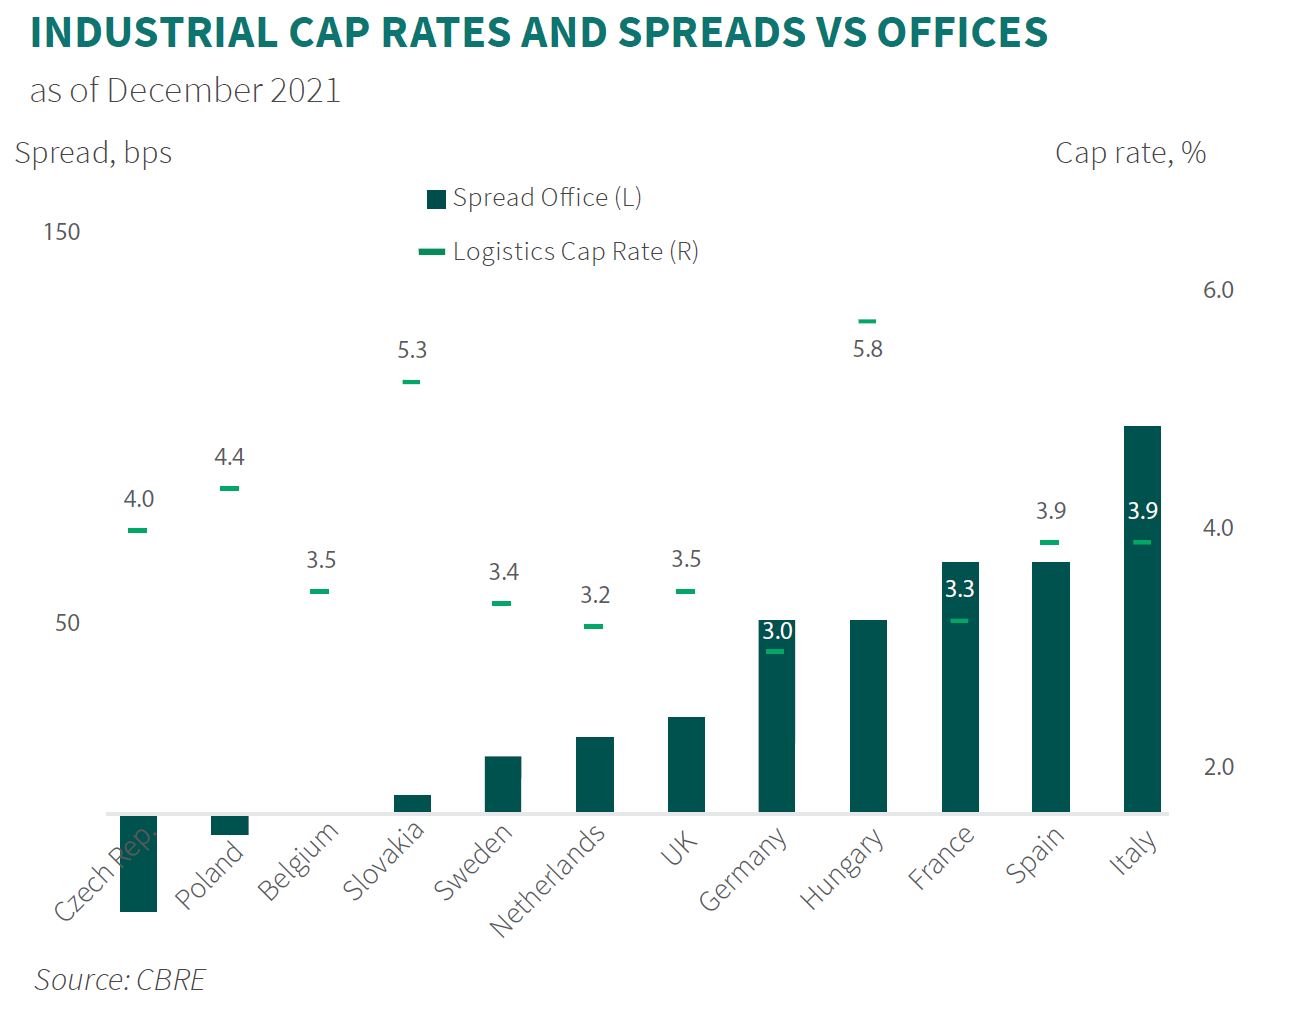 INDUSTRIAL CAP RATES AND SPREADS VS 10-YR BOND RATES